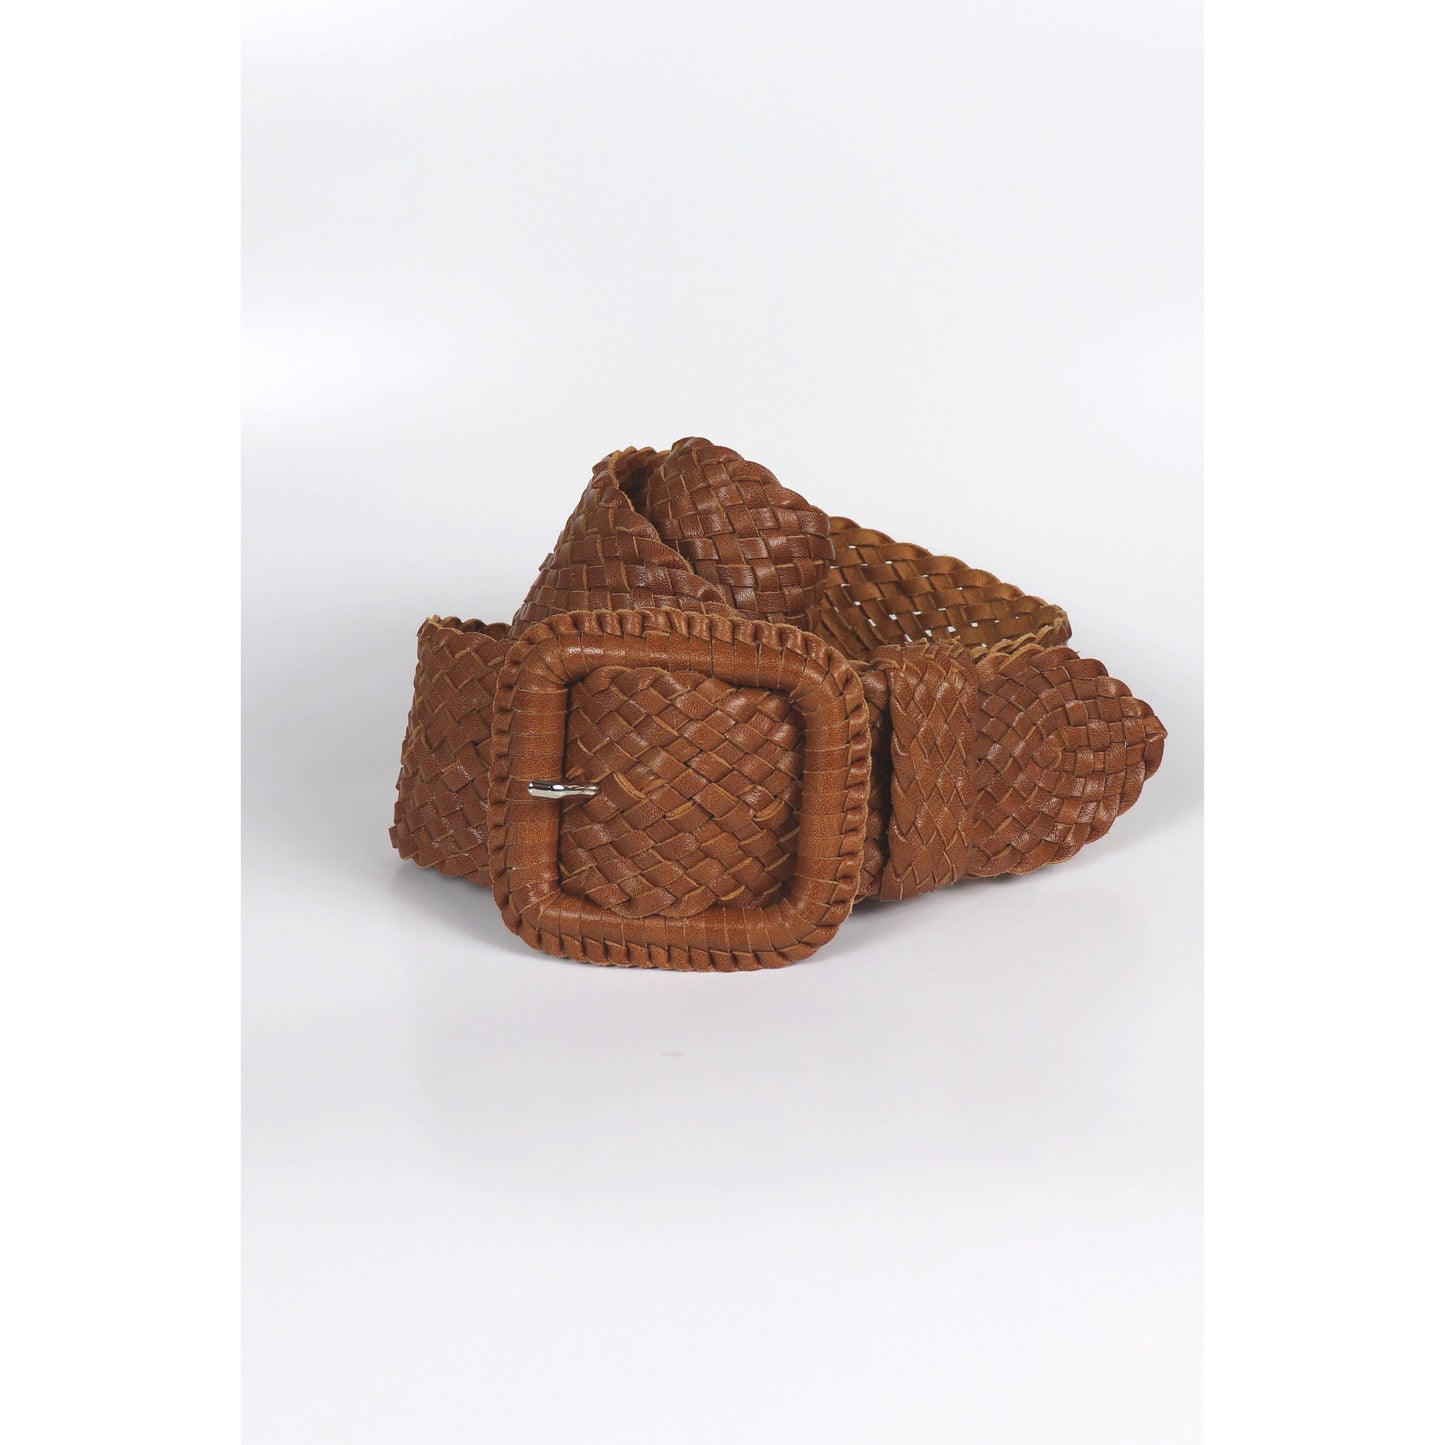 Woven brown leather belt coiled.